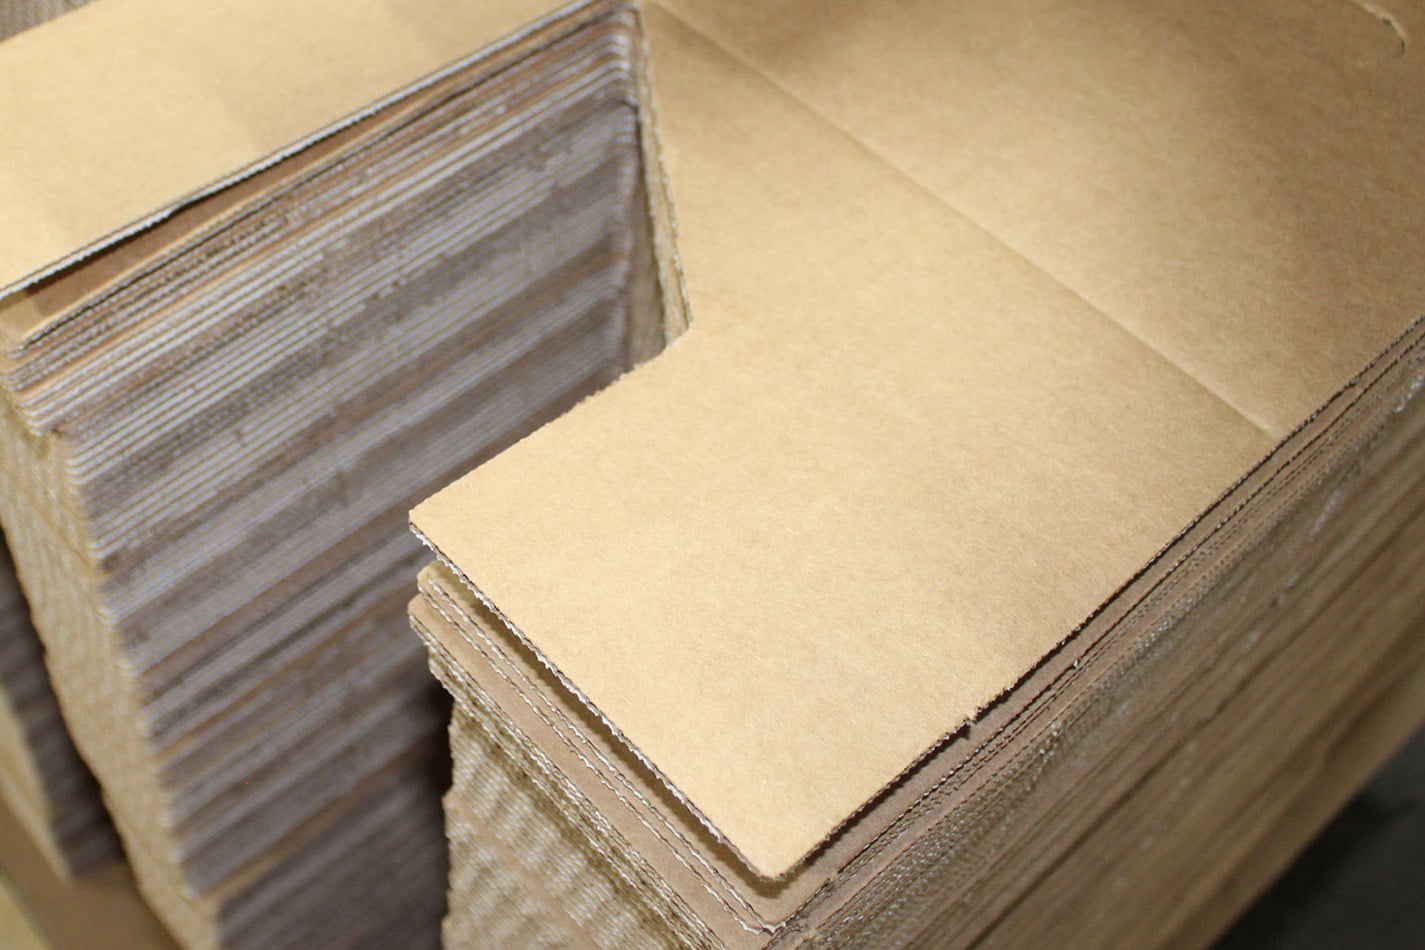 ALTEX Packaging corrugated paper box flats